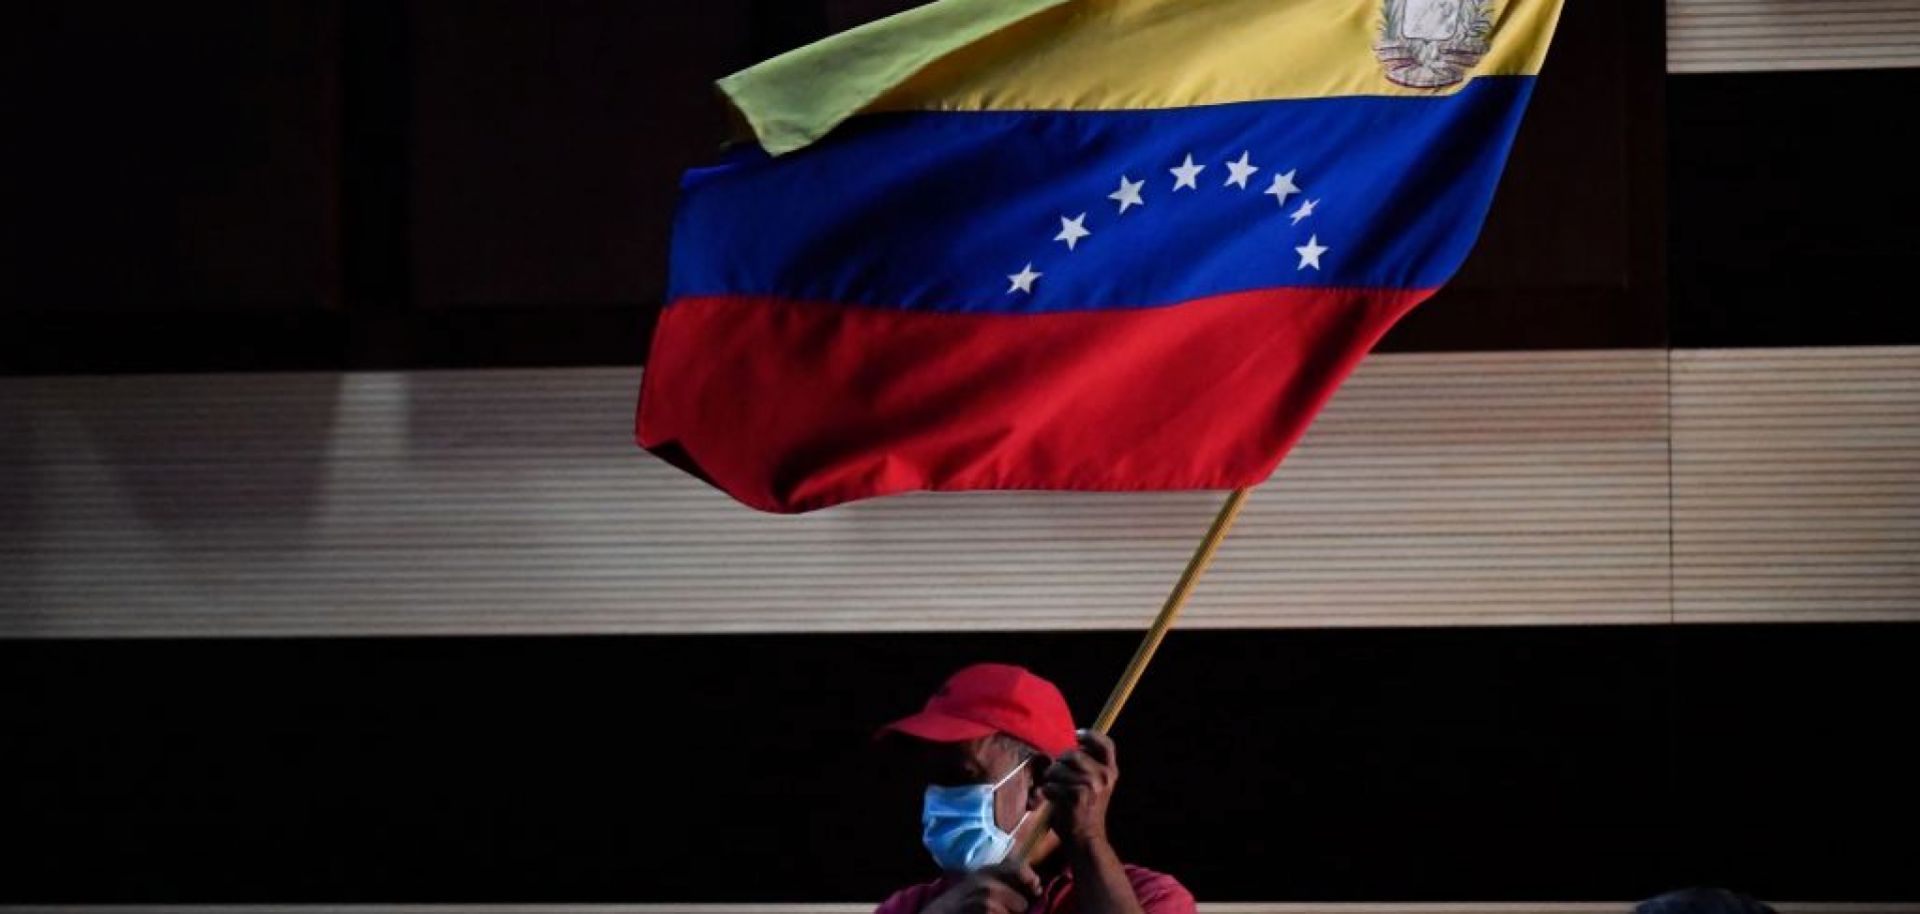 A supporter of the ruling United Socialist Party of Venezuela waves the flag of Venezuela on Jan. 10, 2022, in Barinas, Venezuela.